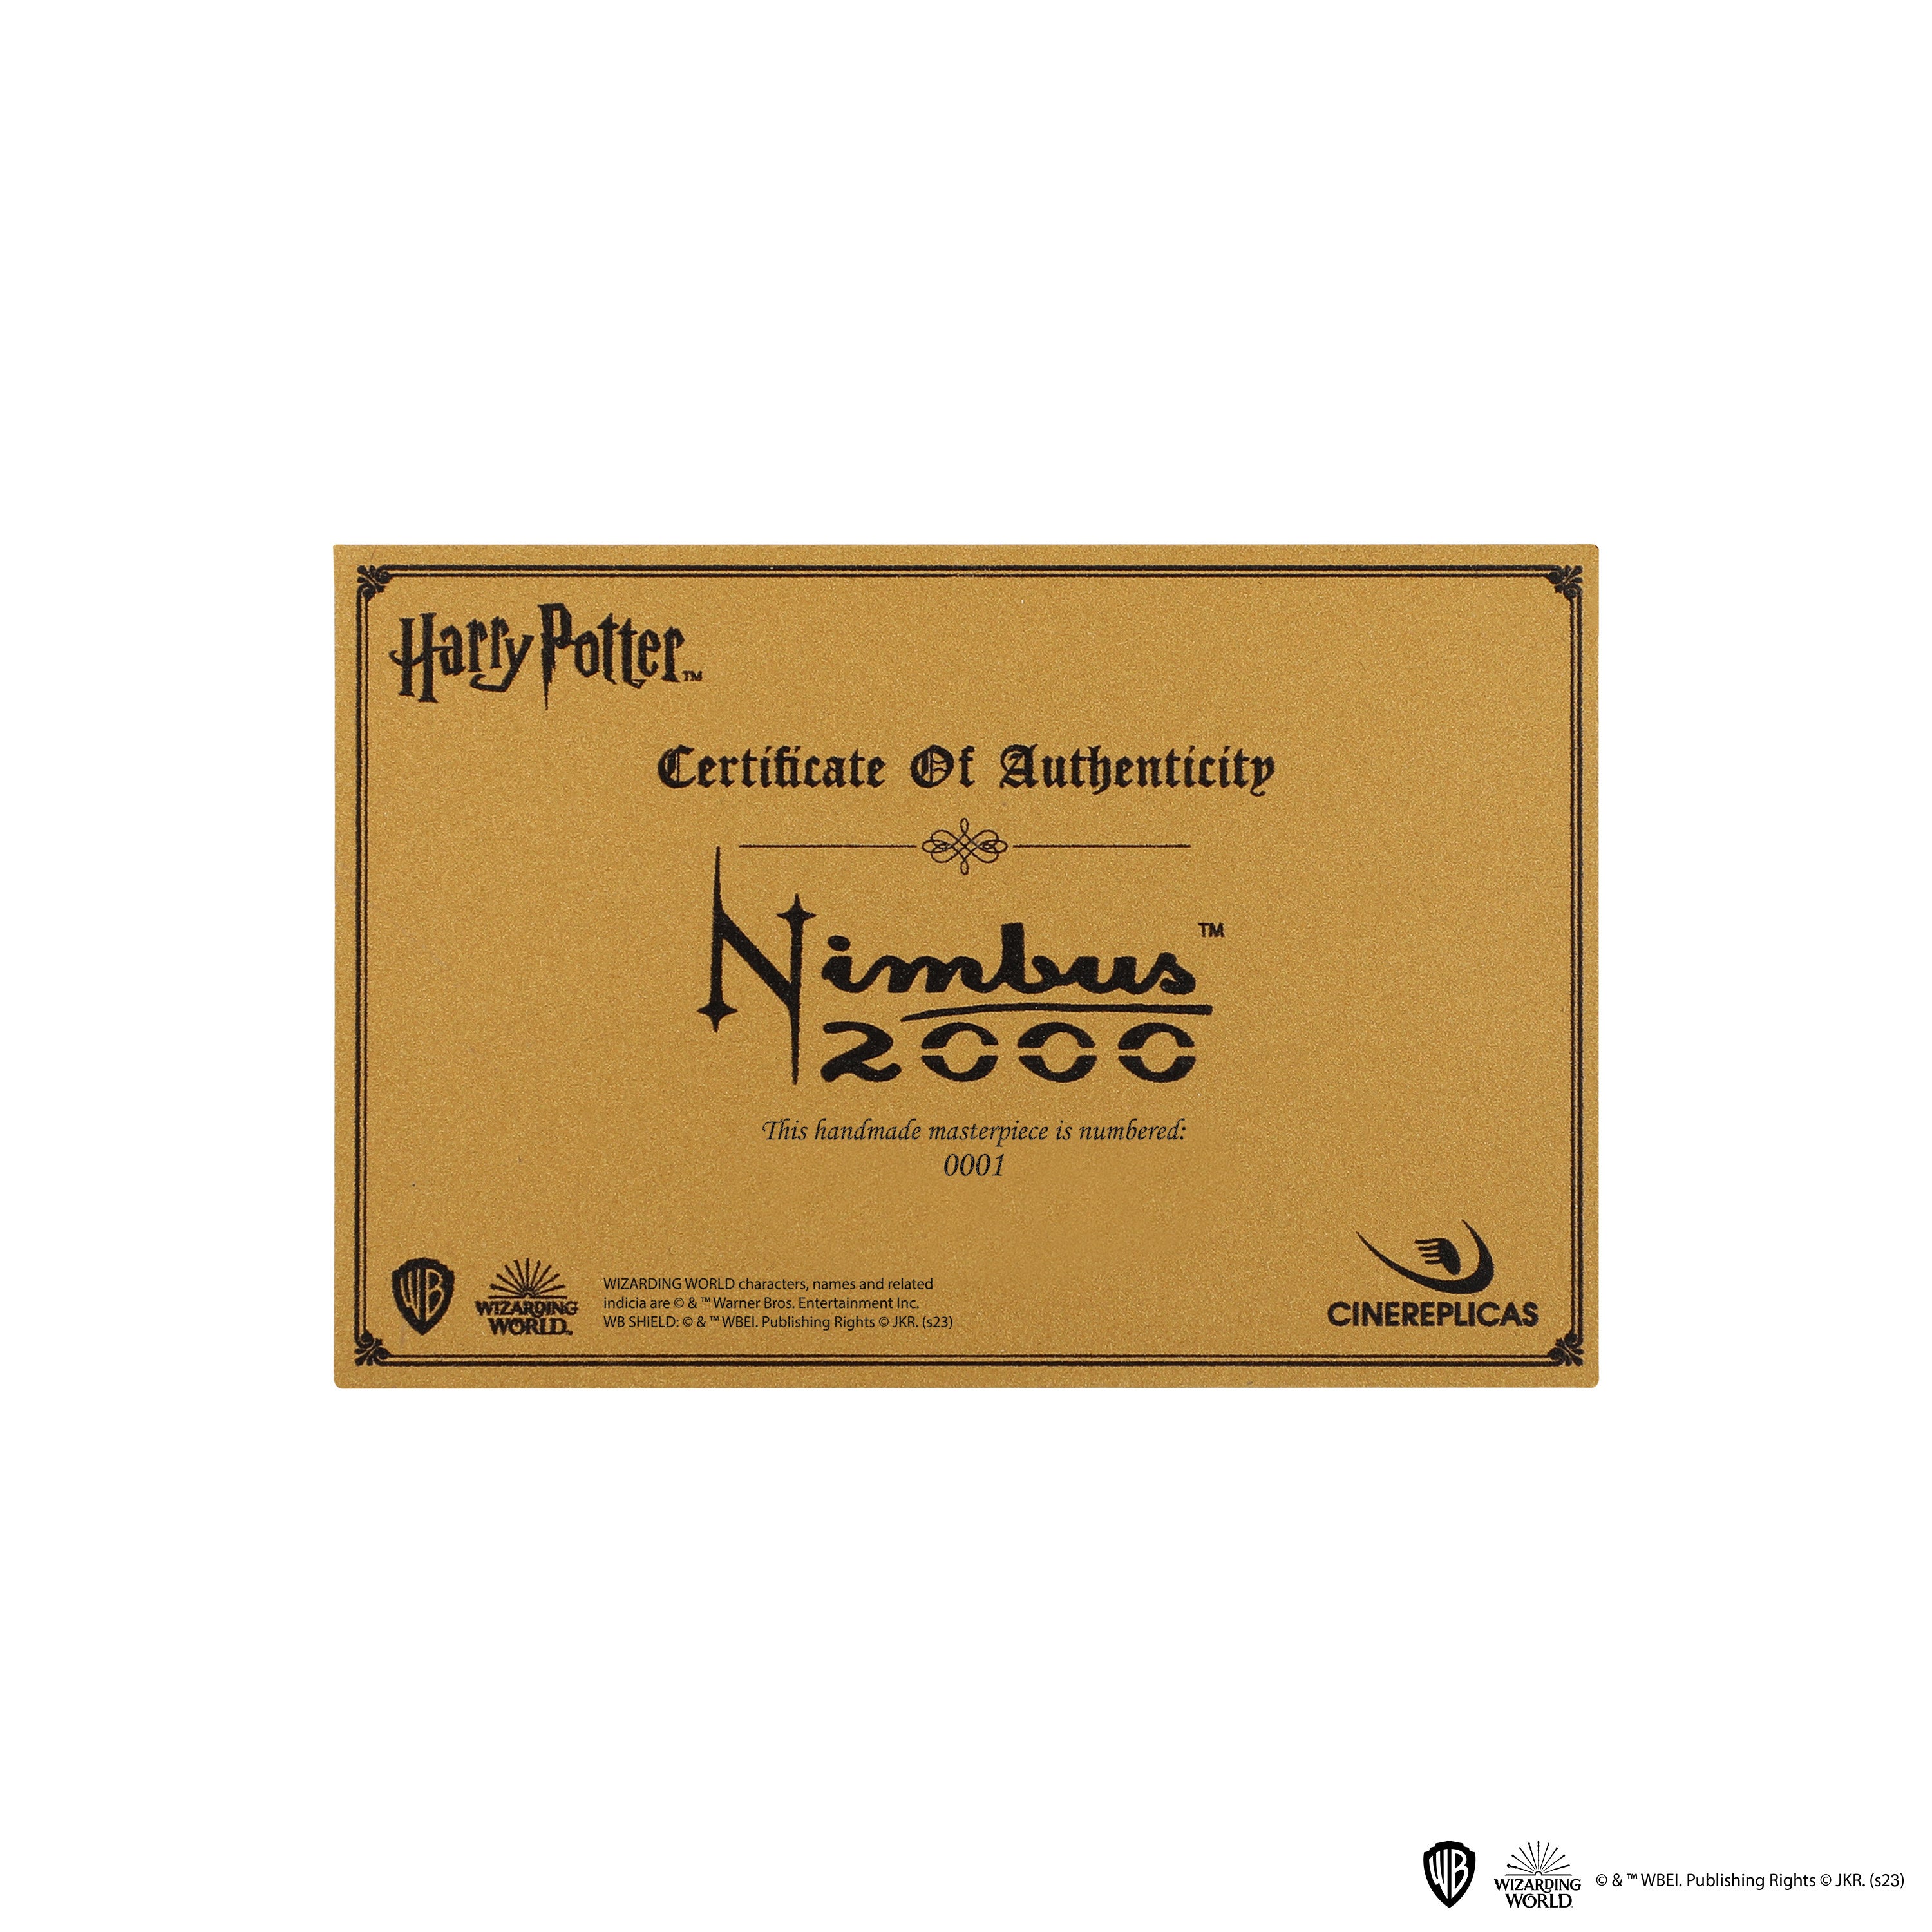 Everything you need to know about our Nimbus 2000 Junior